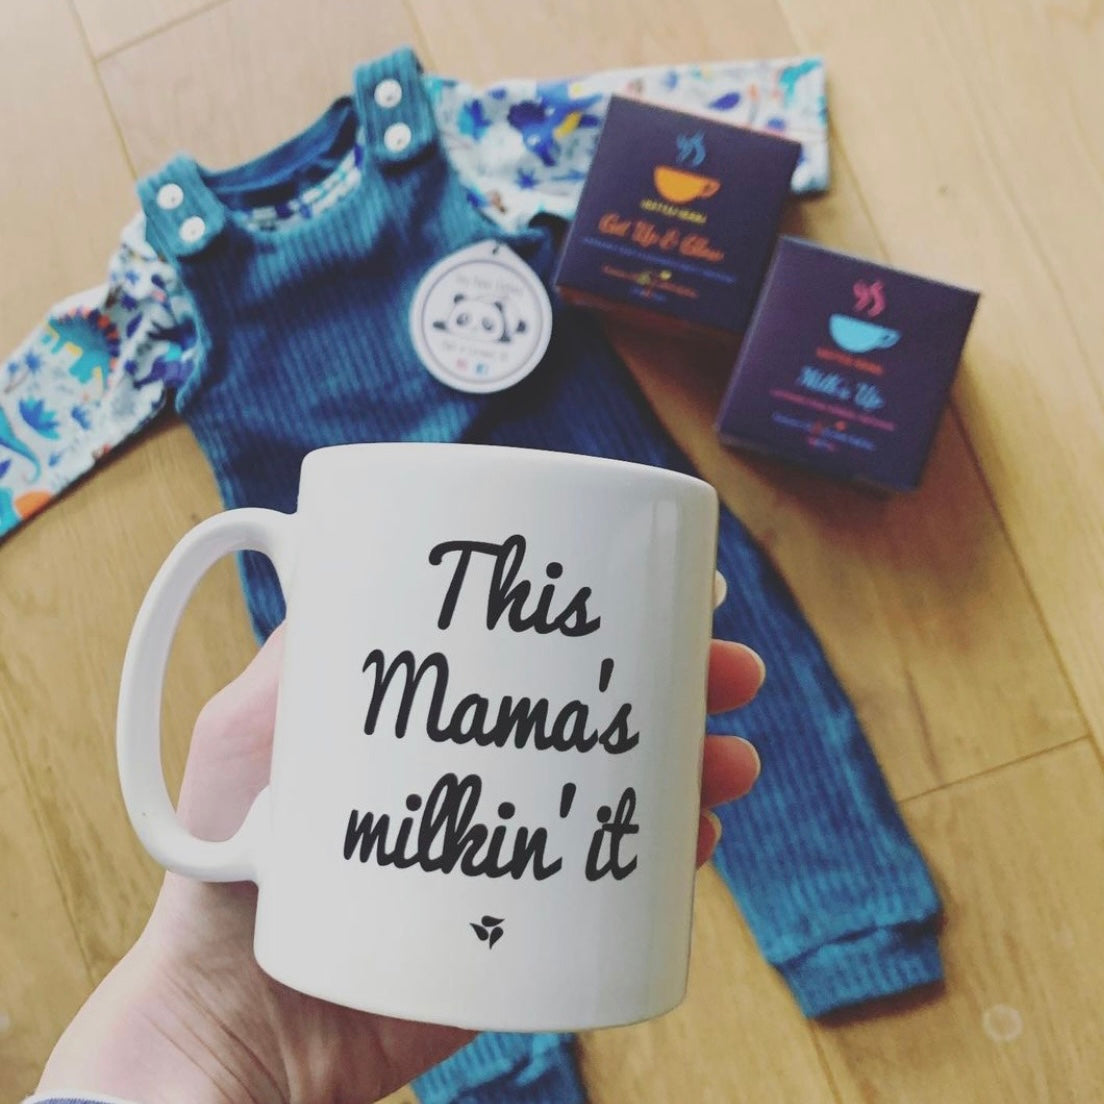 Hand holding a mum that says 'This Mama's milkin' it' in front of baby clothes and 2 packs of tea